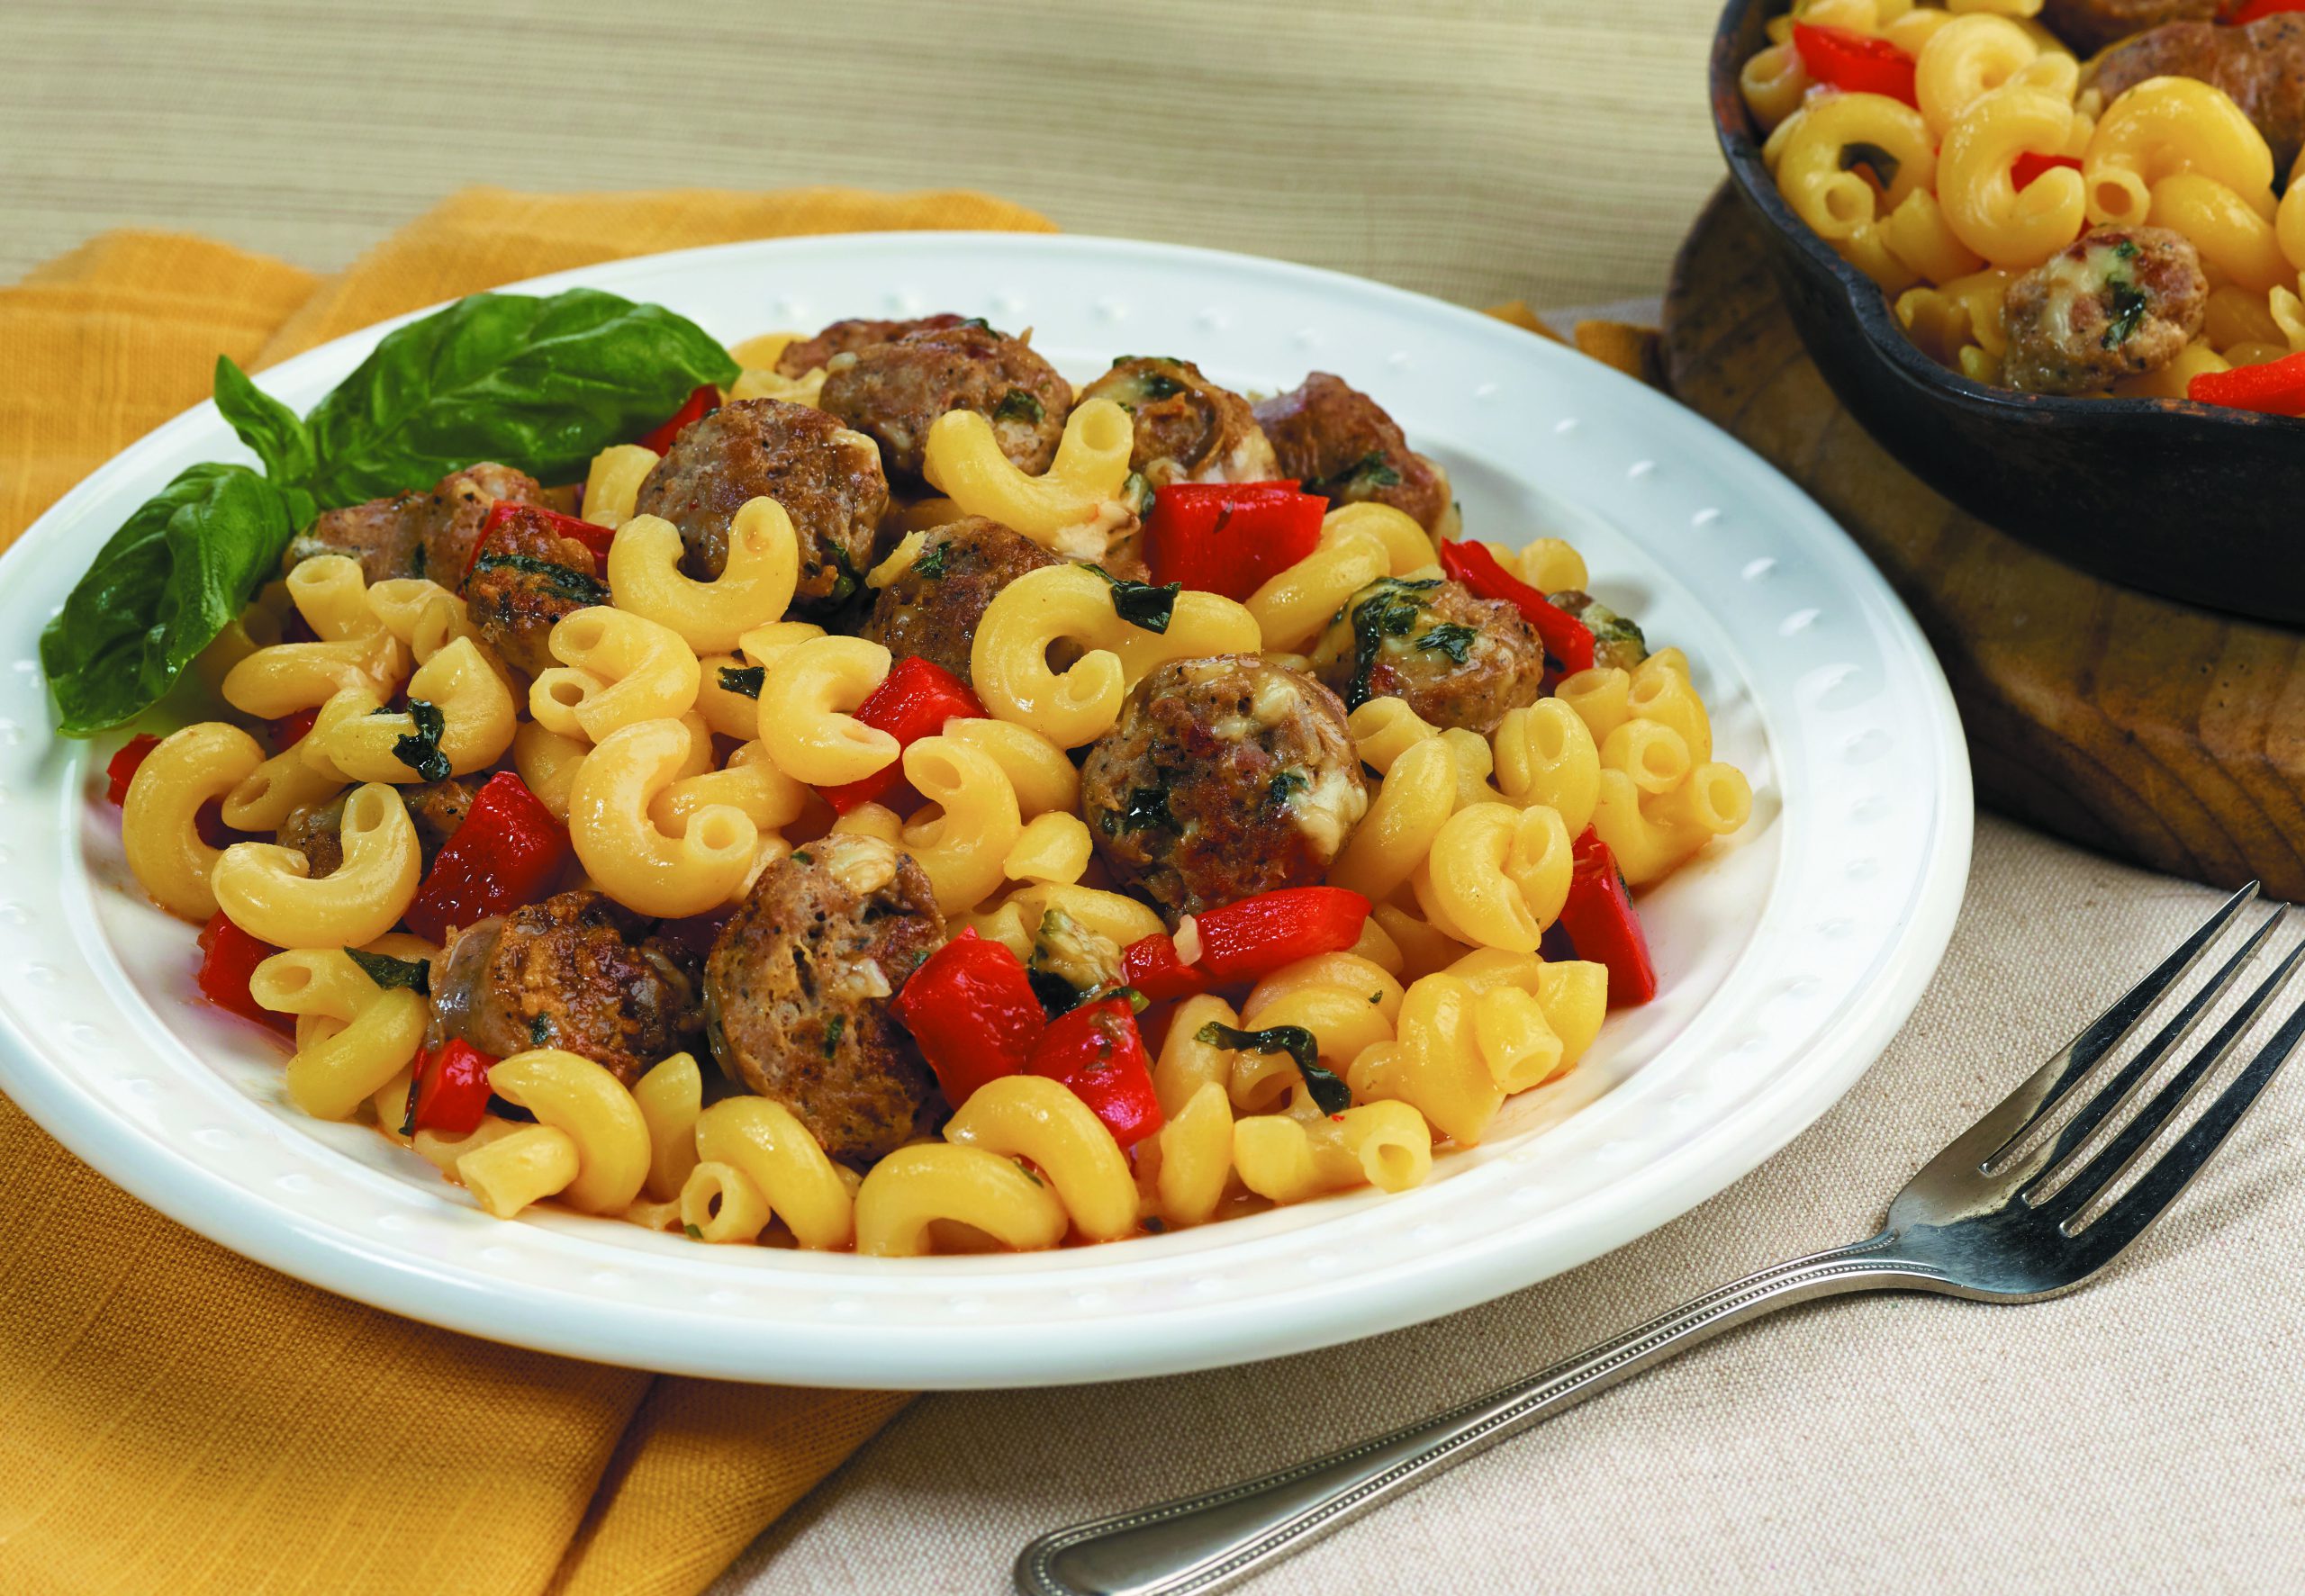 Elbows with Italian sausage, sweet red peppers, and basil